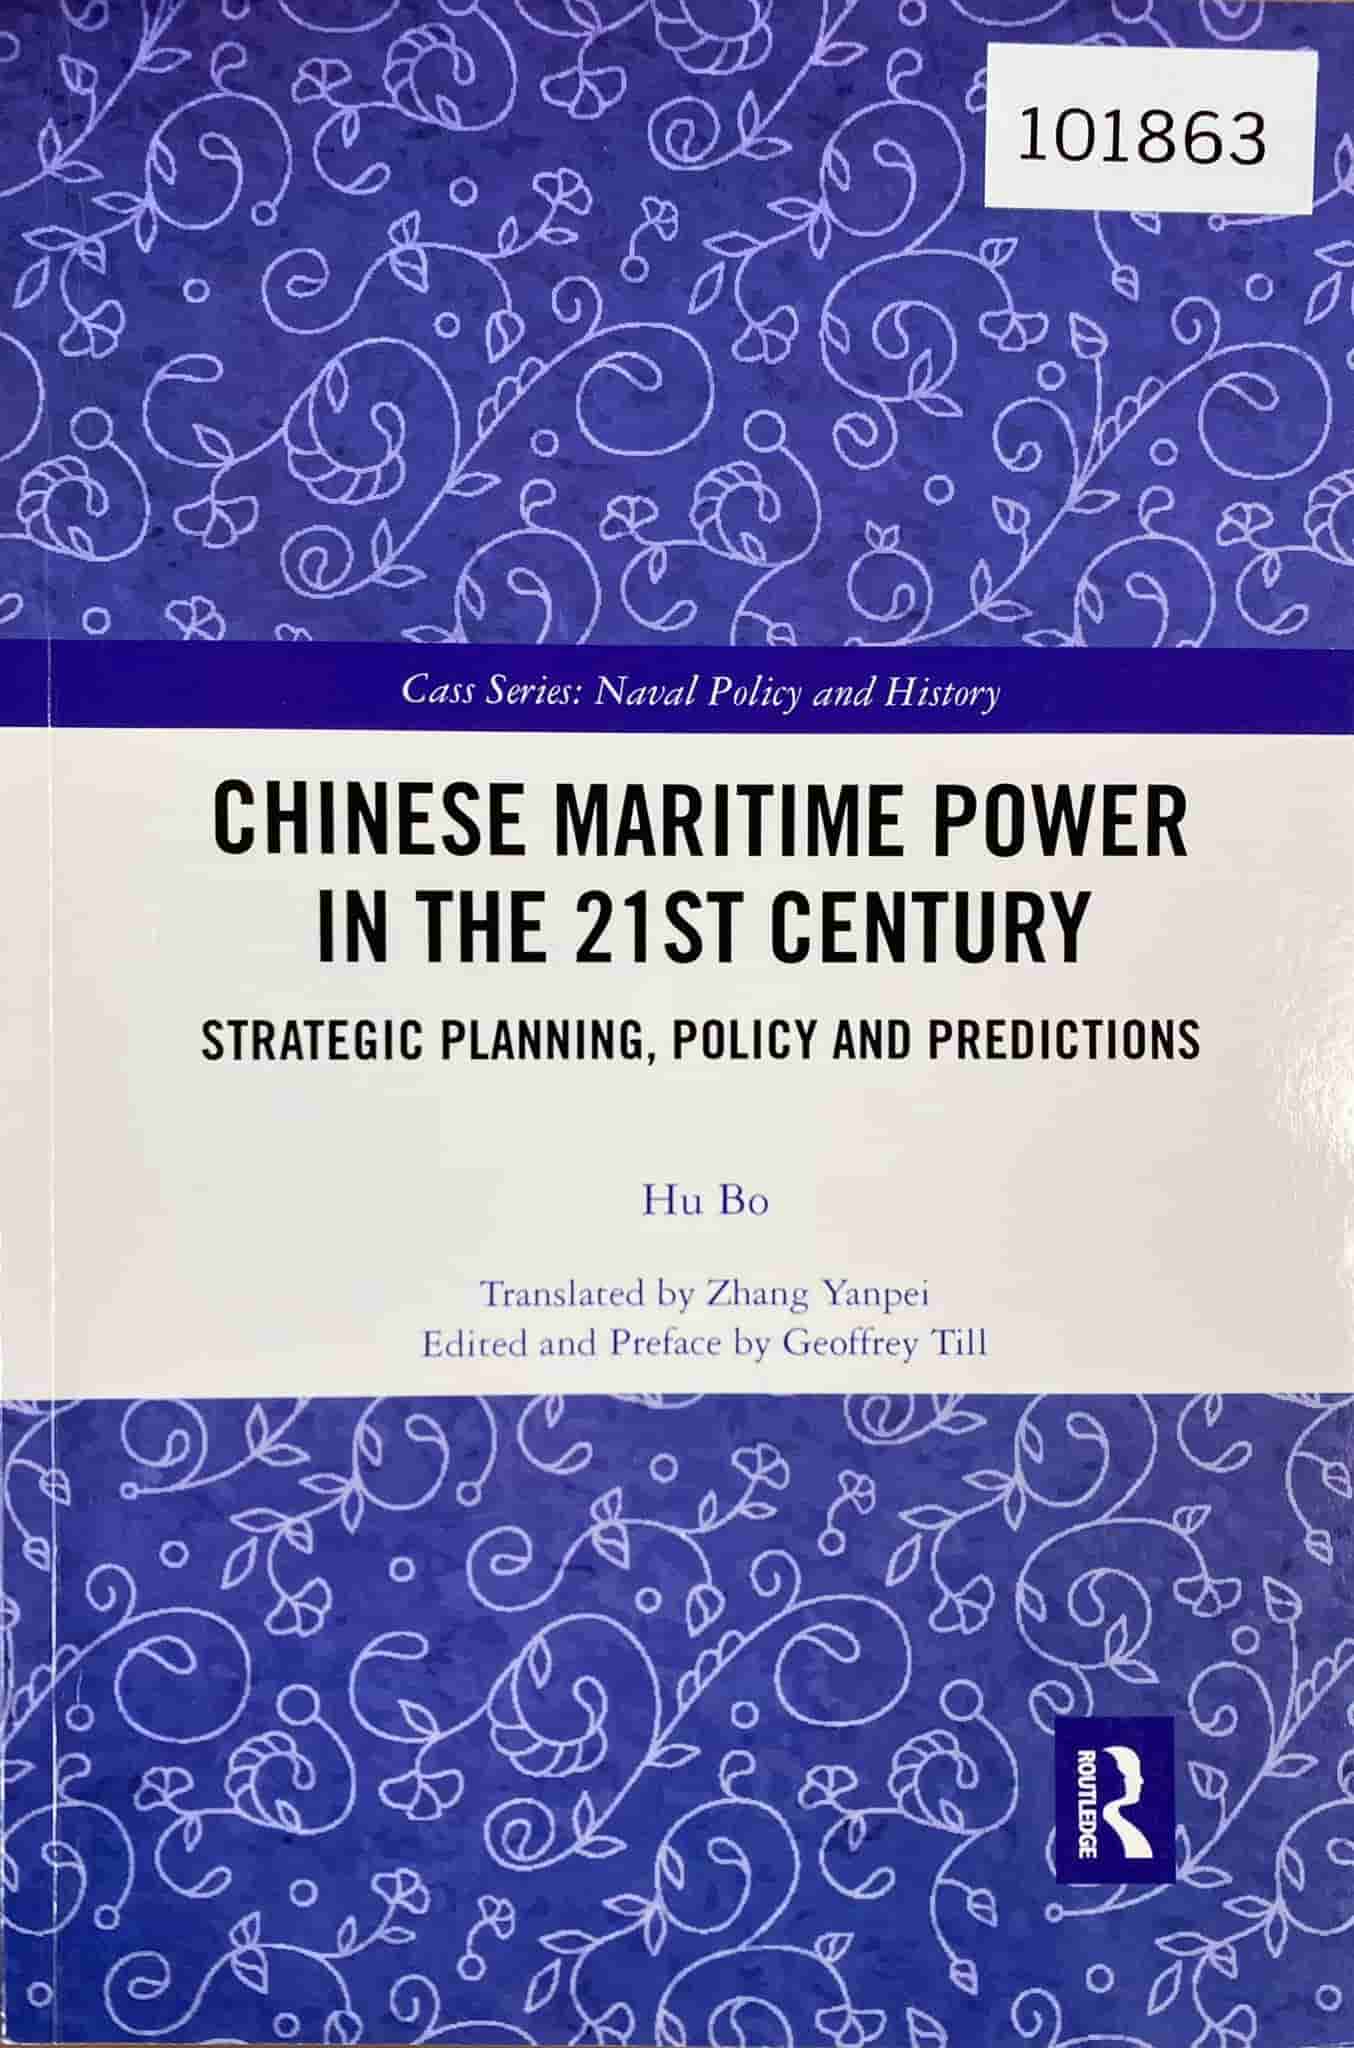 Chinese maritime power in the 21st century: strategic planning, policy and predictions